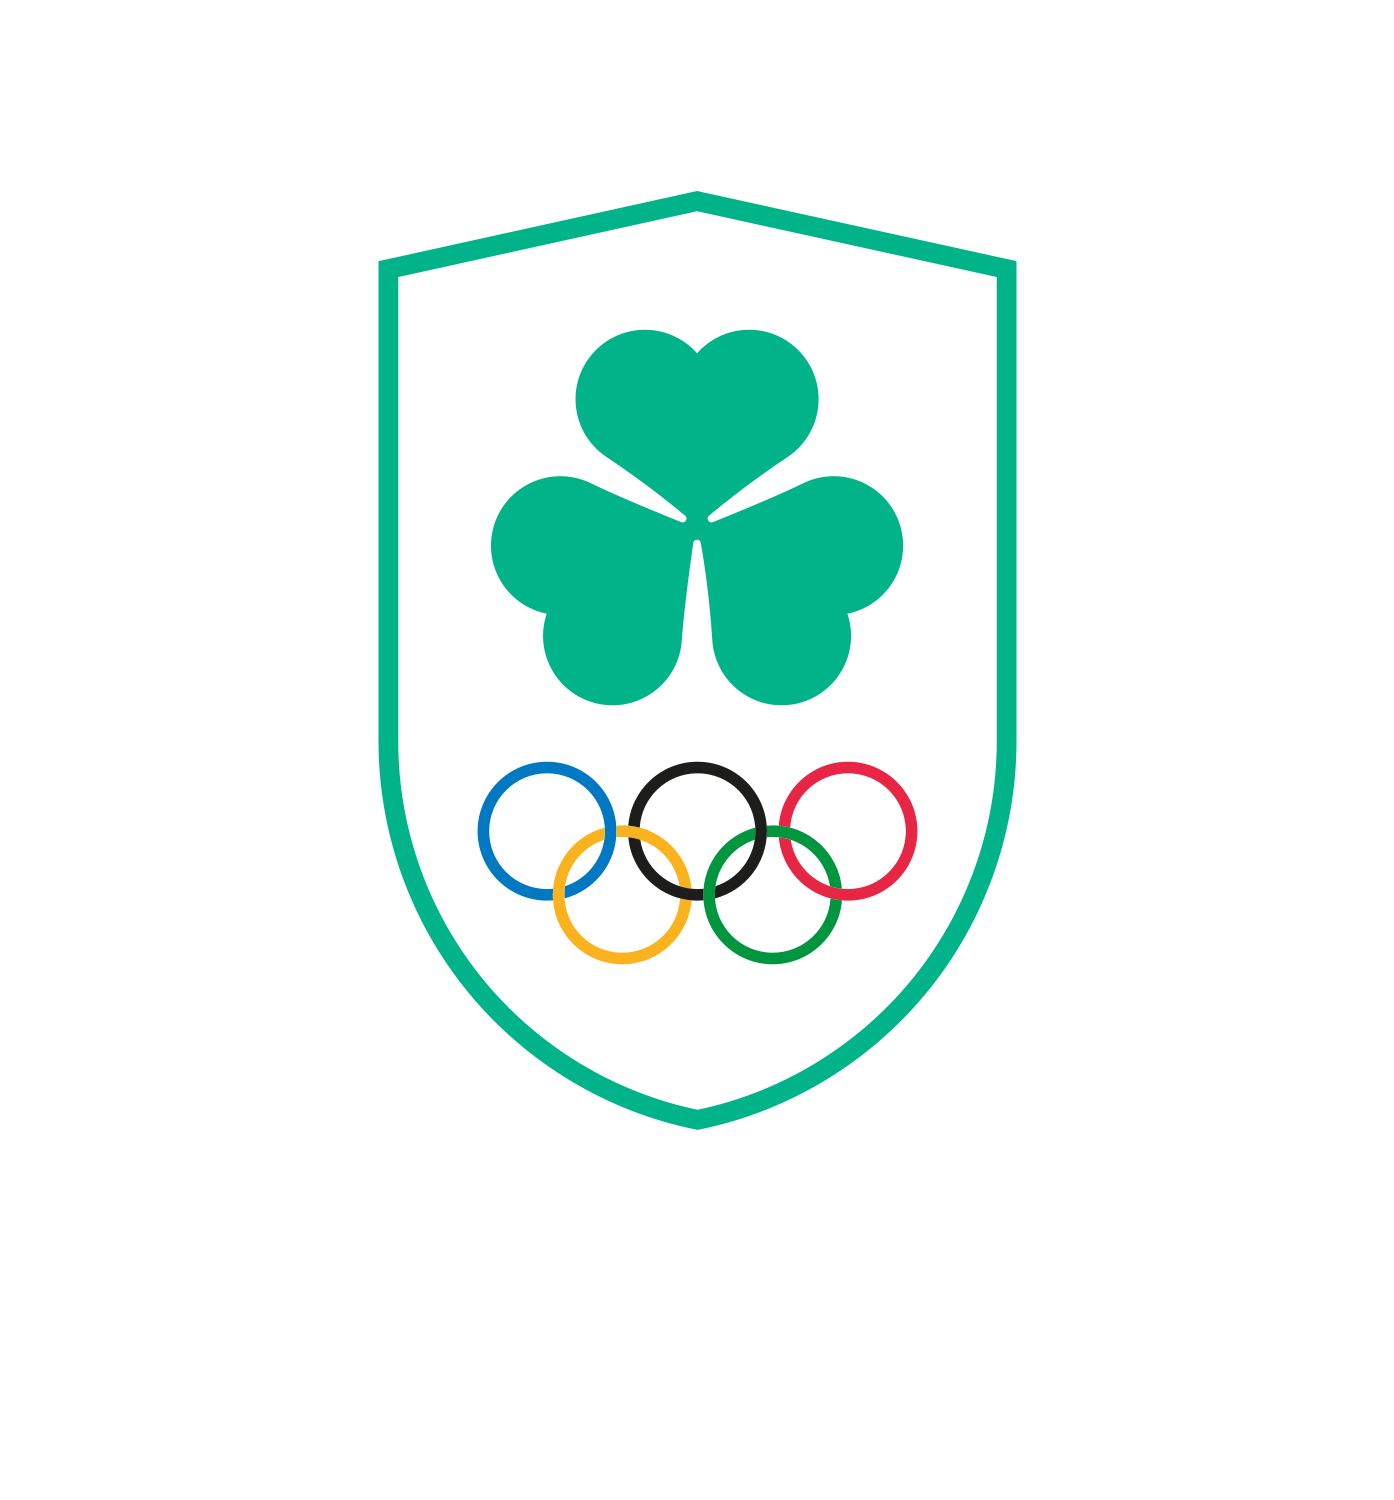 New Look for Team Ireland as the OCI Olympic Federation of